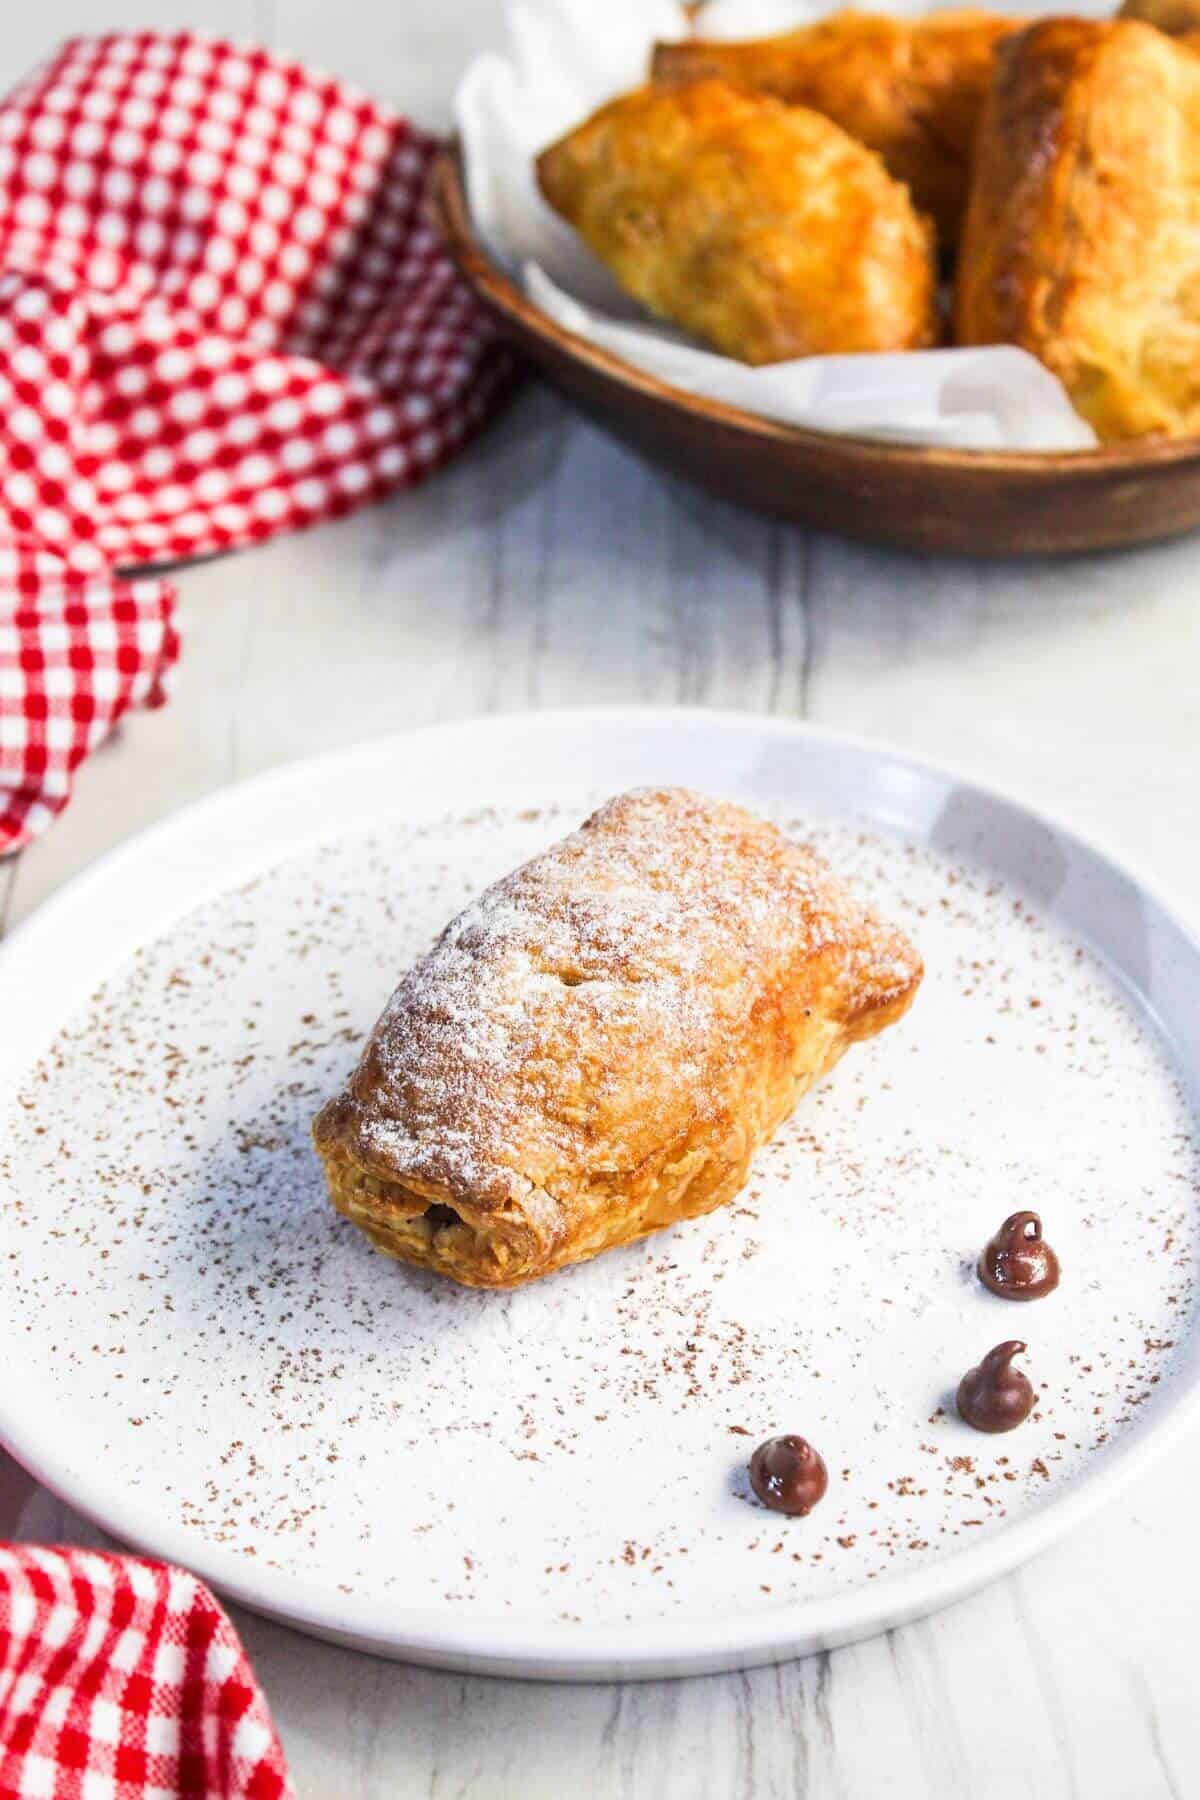 A freshly baked chocolate pastry dusted with powdered sugar on a white plate, decorated with chocolate chips and served on a wooden table with a red checkered napkin.